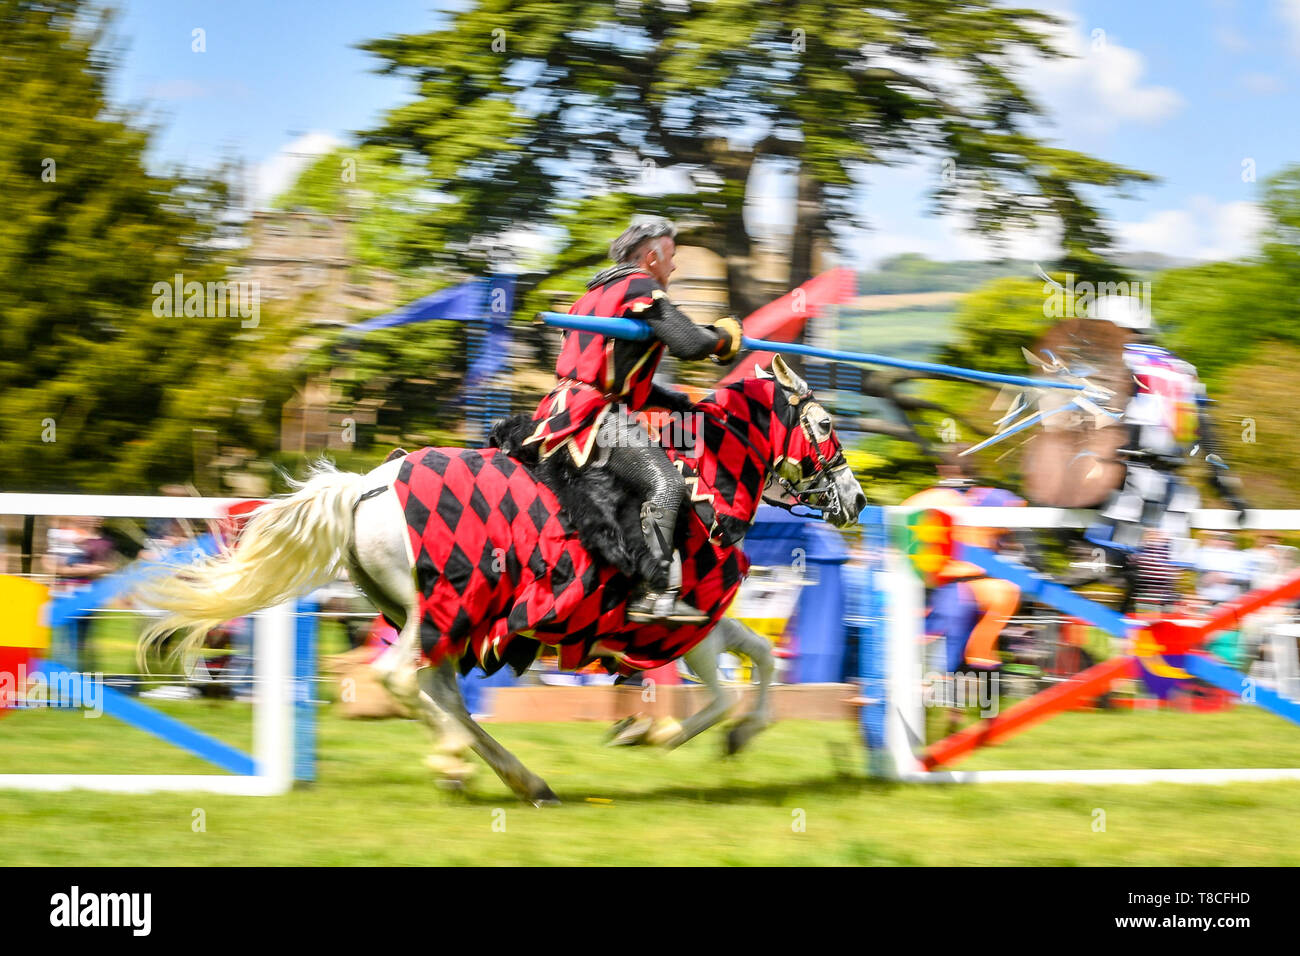 The red knight gallops along the tilt towards his opponent during a jousting performance at Sudeley Castle annual jousting event in Winchcombe, Gloucestershire. Stock Photo